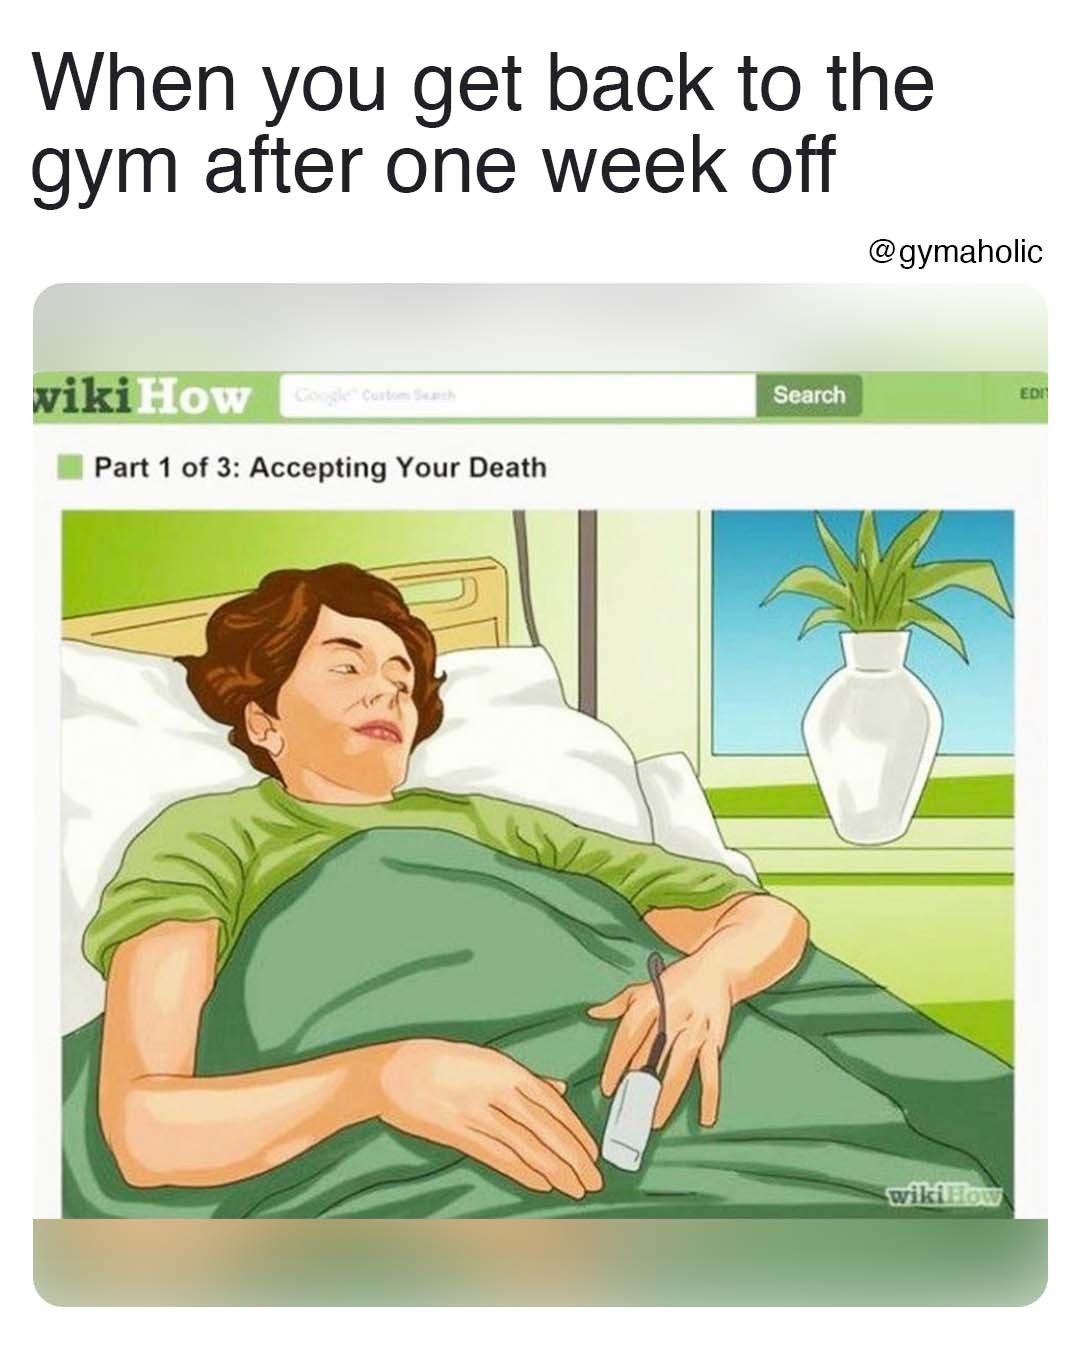 When you get back to the gym after one week off